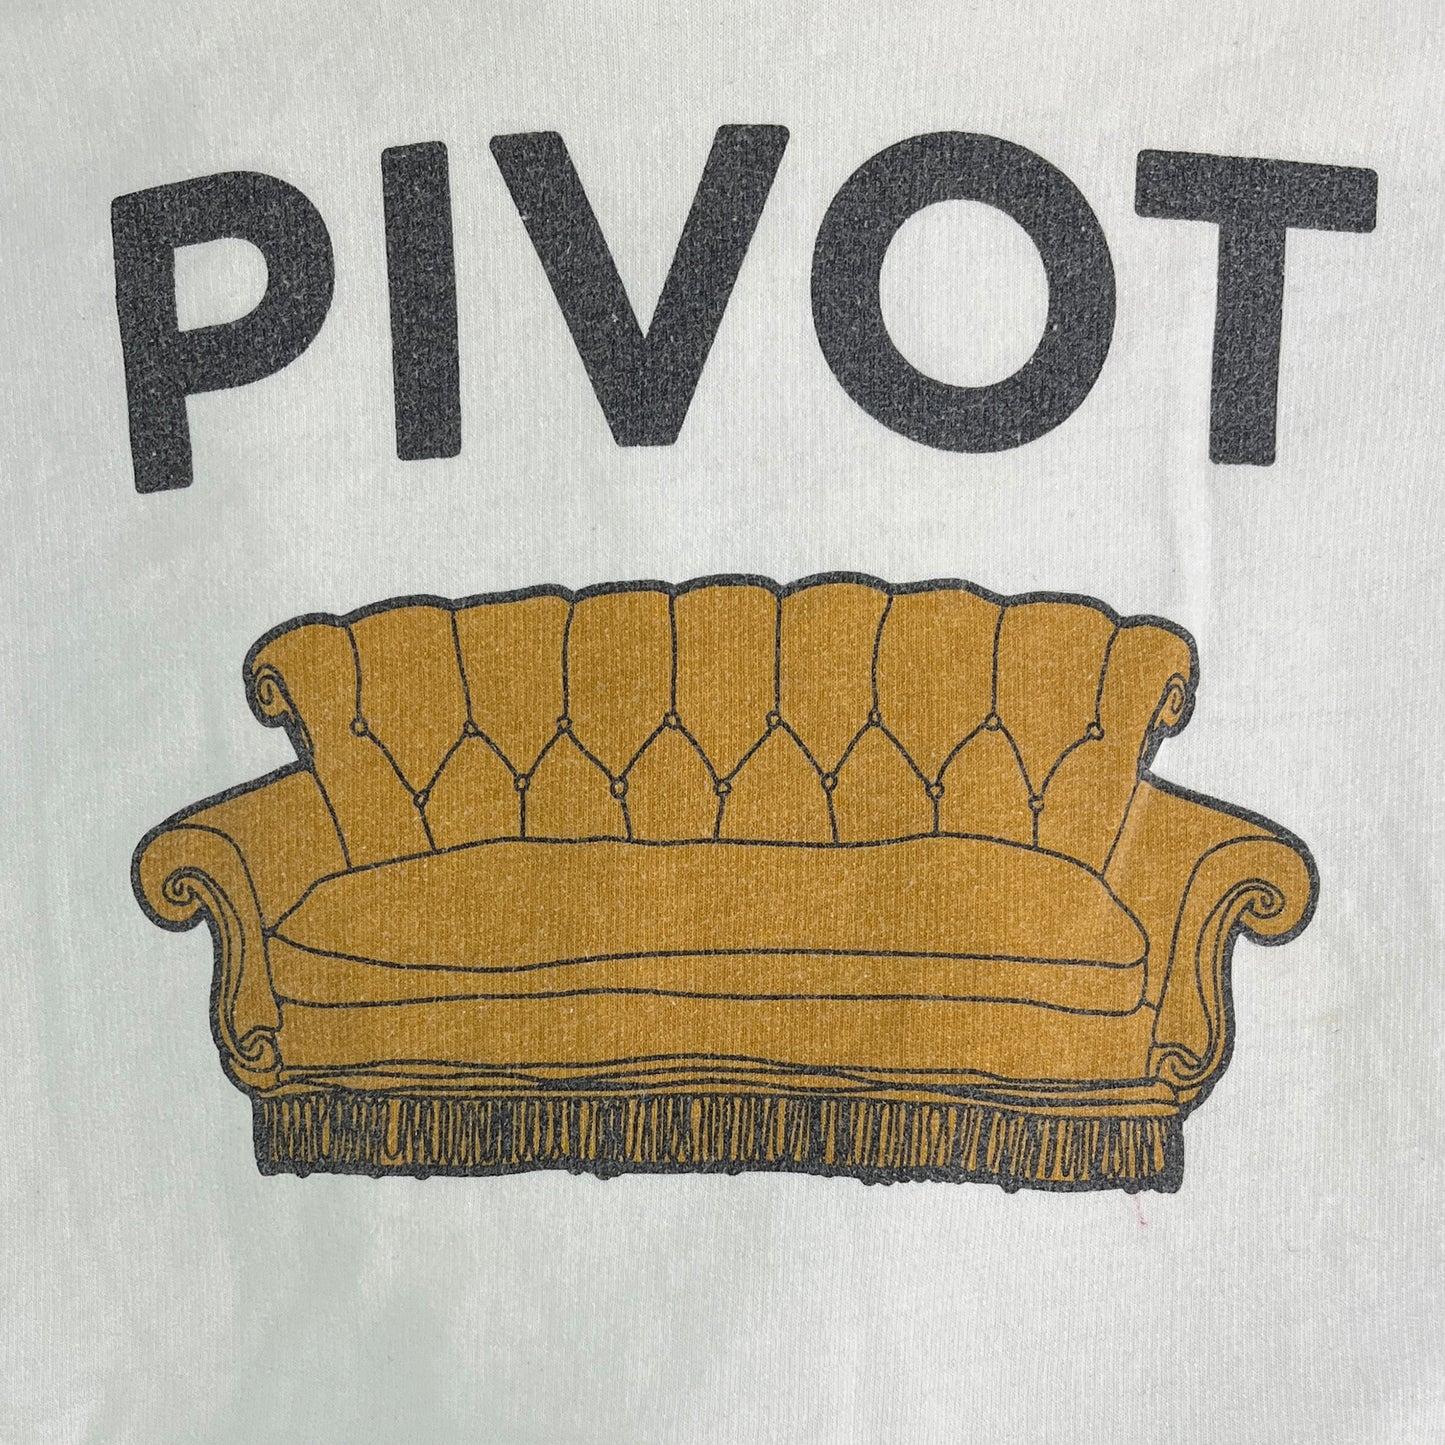 Friends The TV Series Pull-Over Hoodie "Pivot" White Size S SKU 000366-11